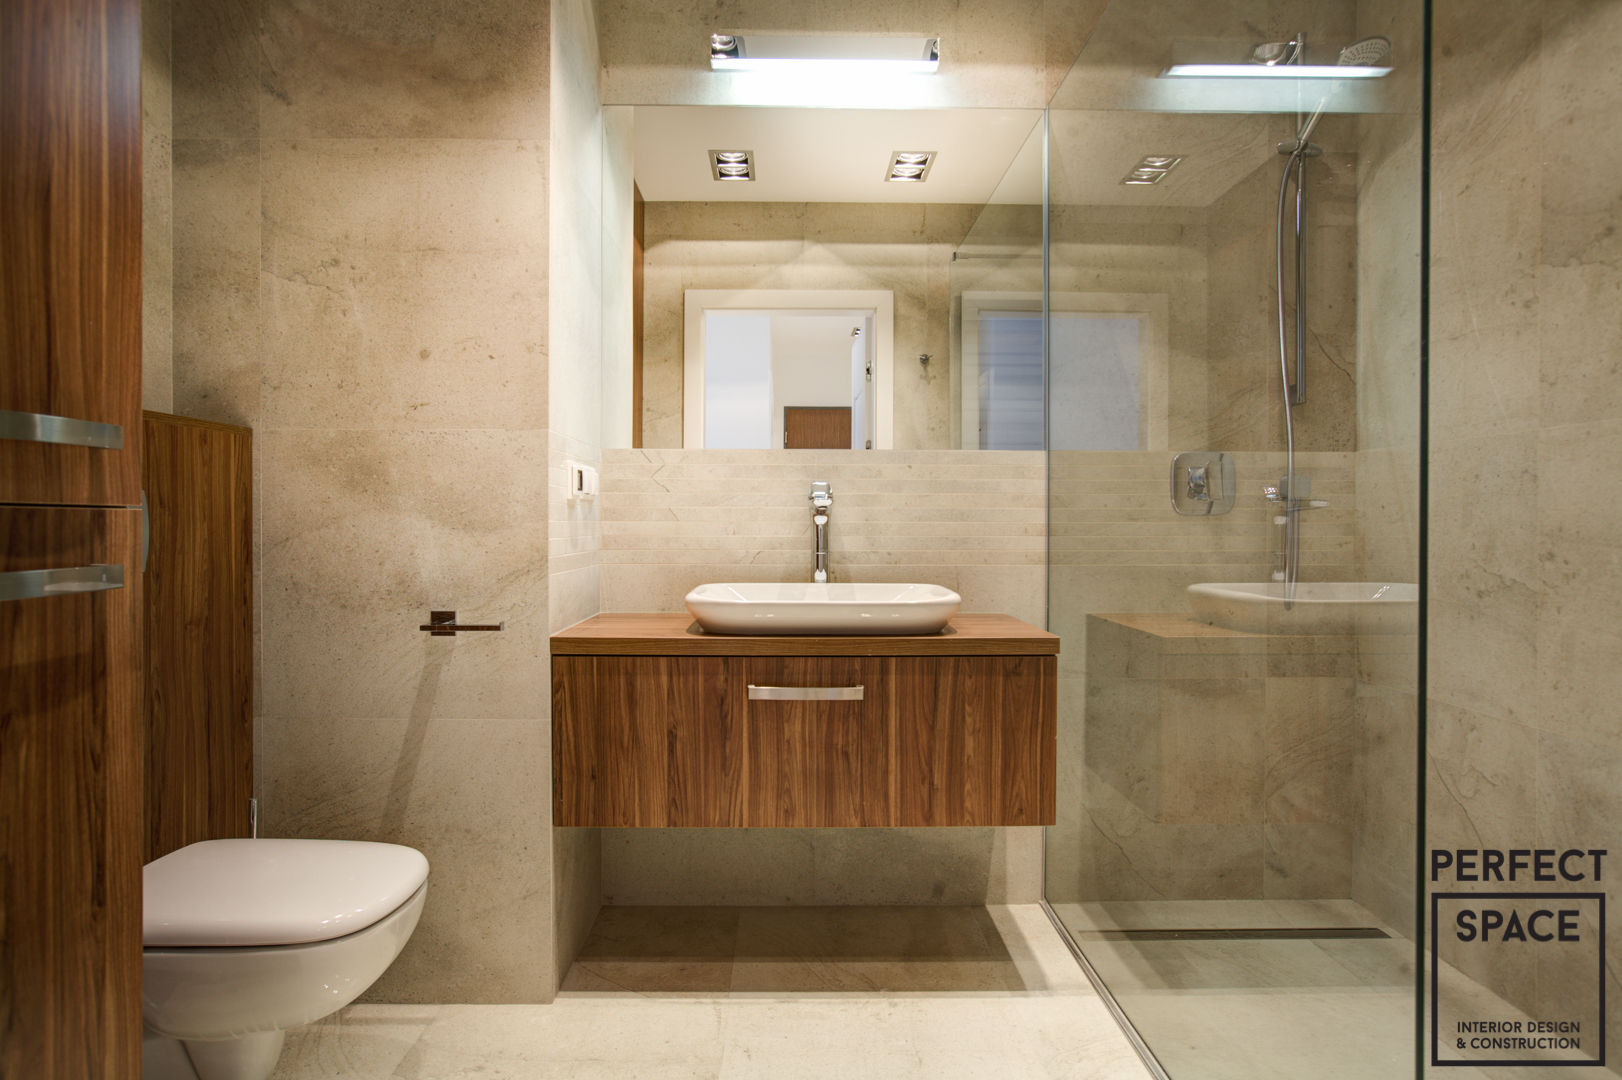 Klimat pod wynajem, Perfect Space Perfect Space Classic style bathrooms